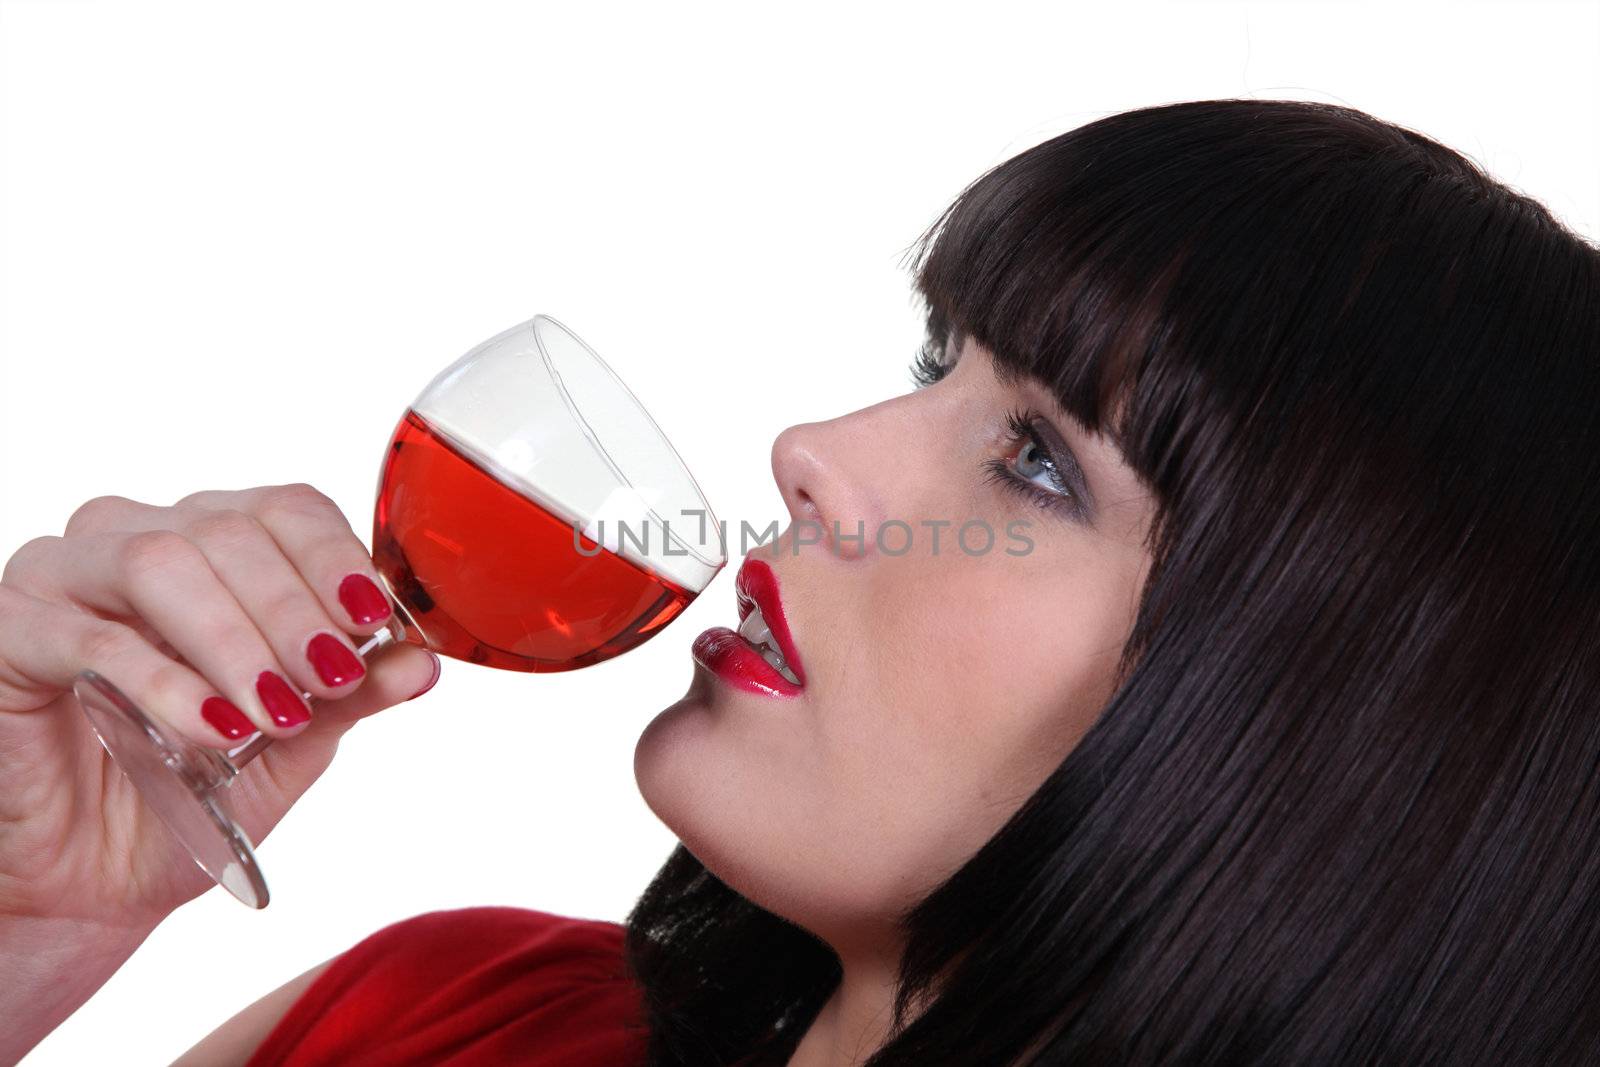 Striking shot of a woman drinking a glass of wine by phovoir